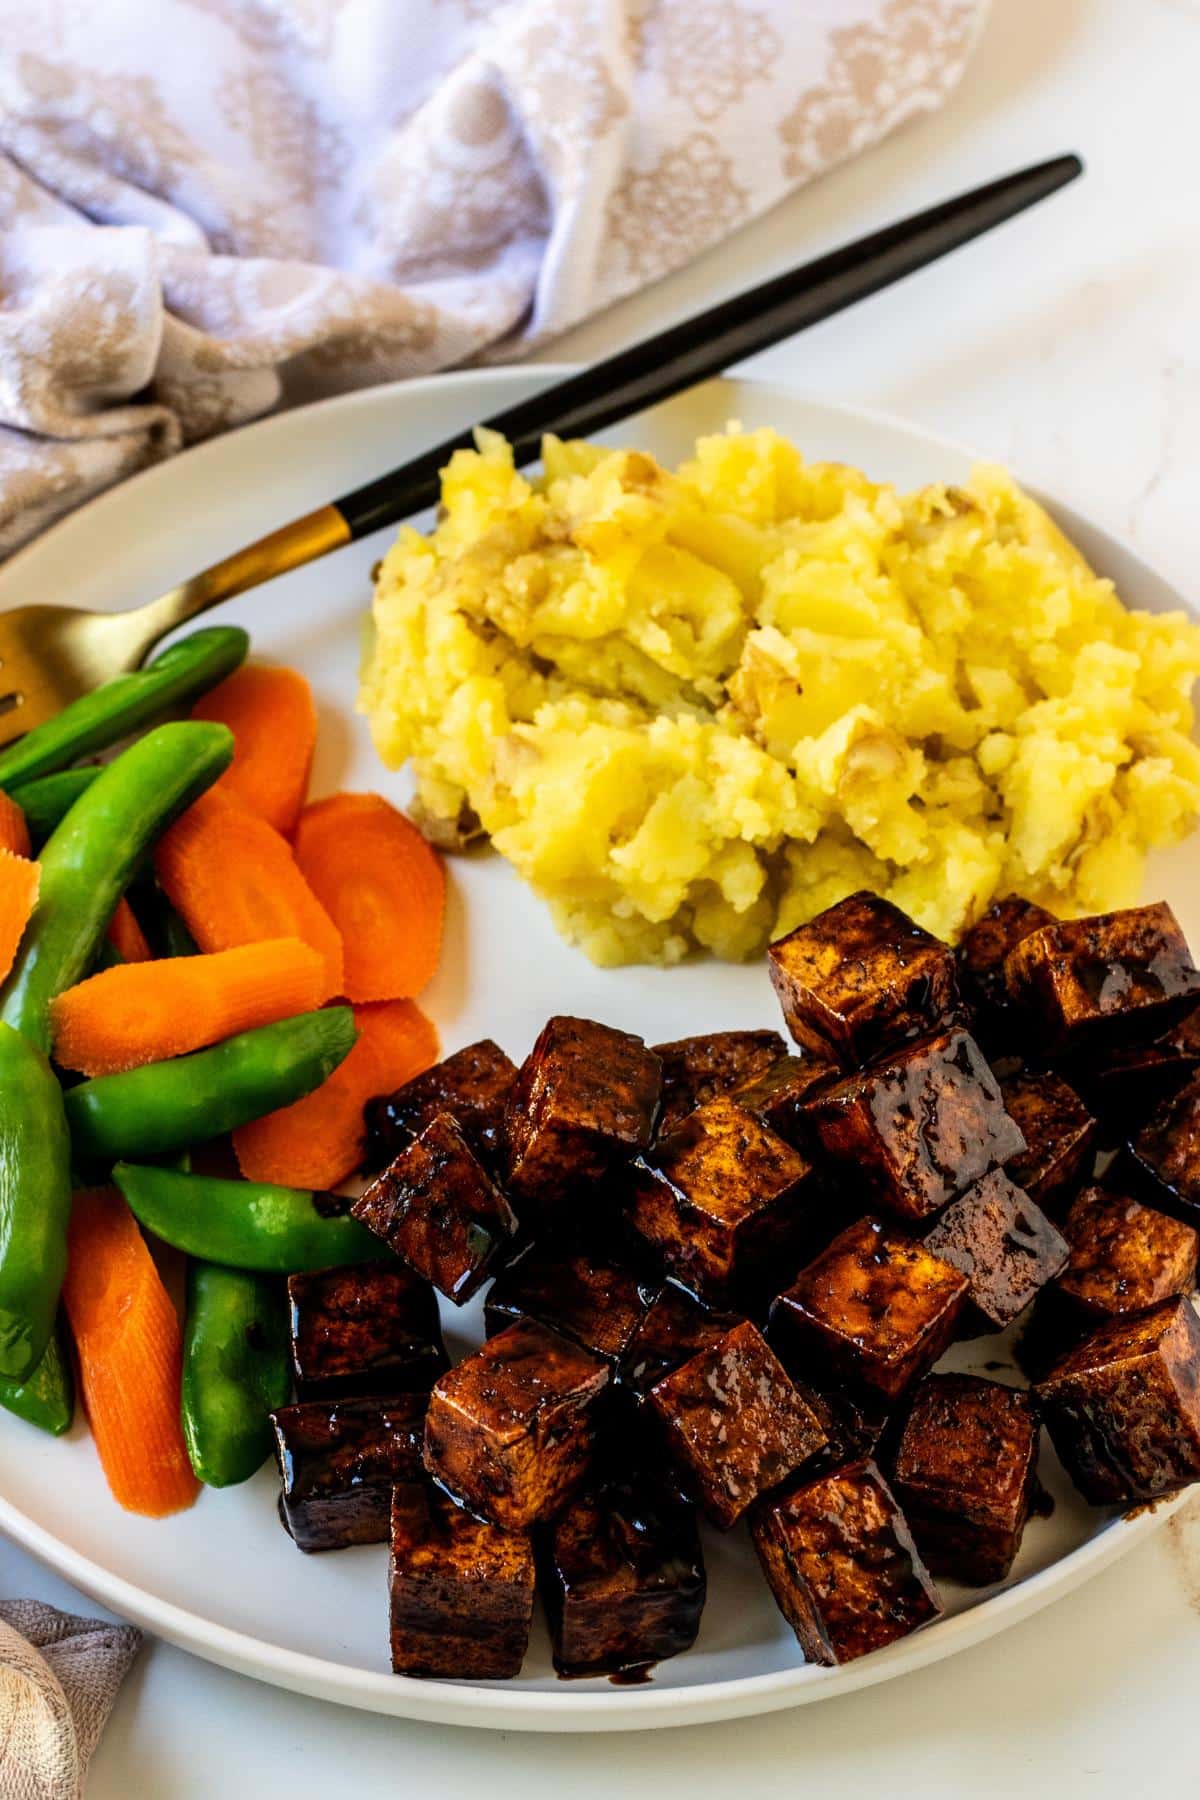 Dinner plate with balsamic tofu, mashed potatoes, and steamed sugar snap peas and carrots.